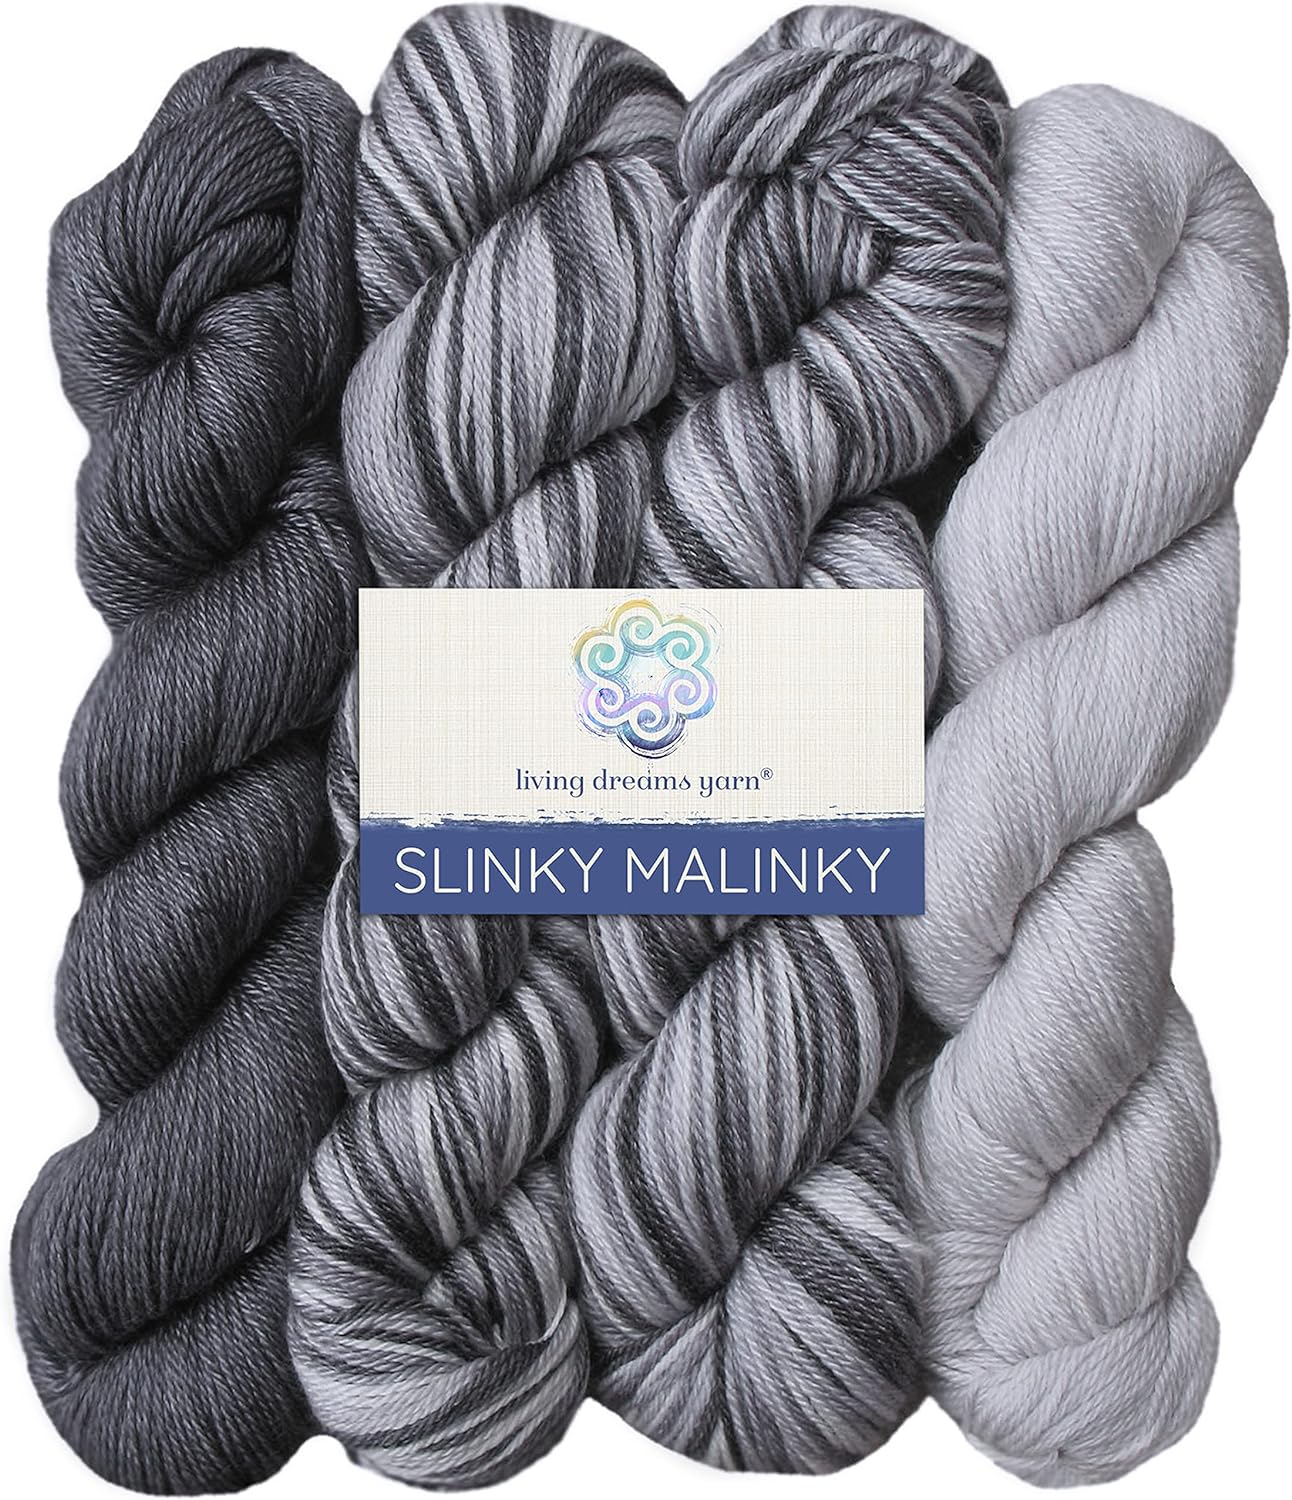 Slinky Malinky Superwash Merino Sock Yarn with Tencel - Silky & Strong.  Pacific Northwest Hand Dyed. Fingering Weight #1.